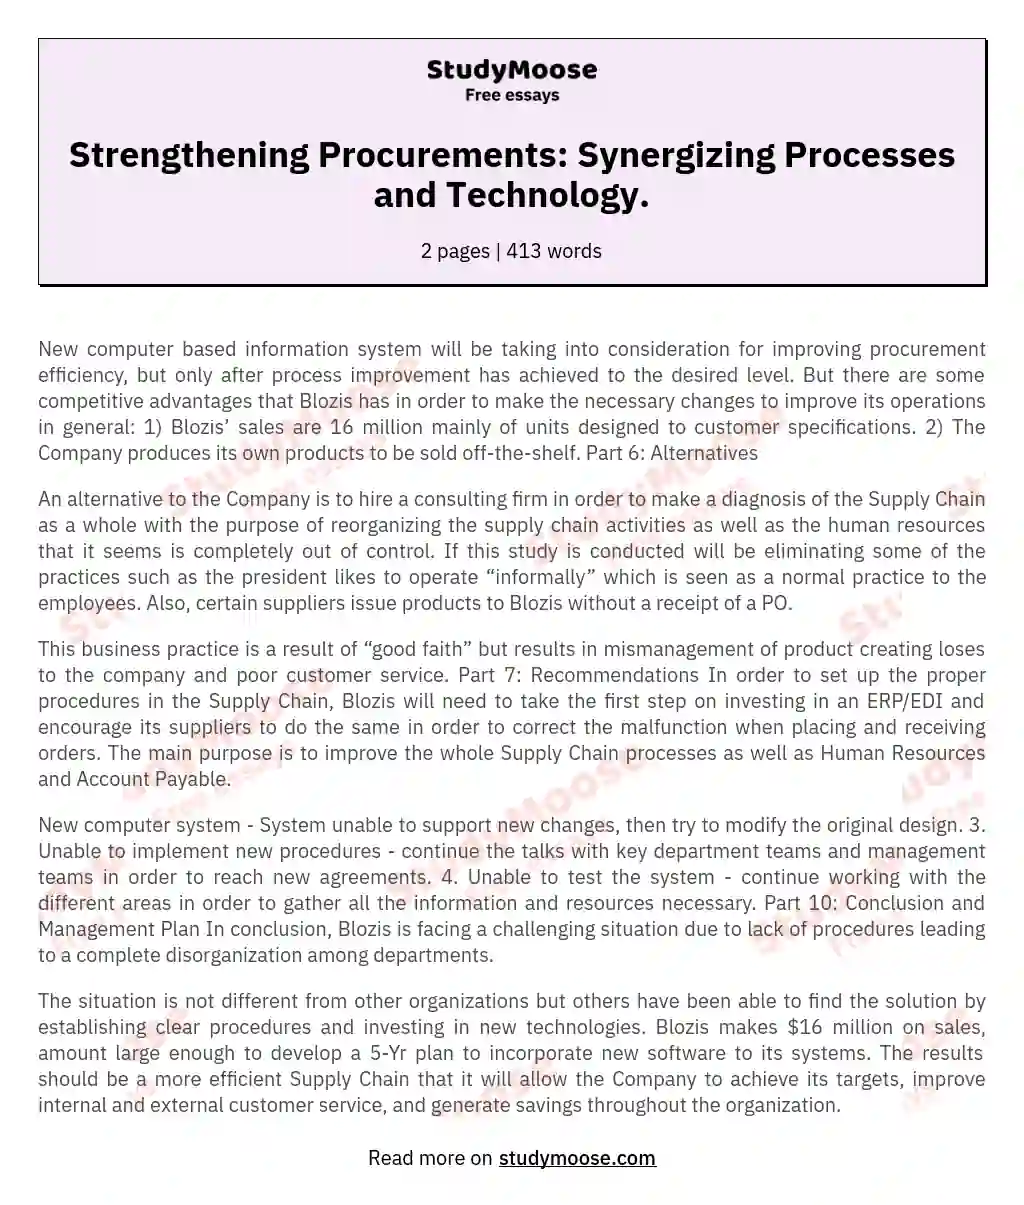 Strengthening Procurements: Synergizing Processes and Technology. essay